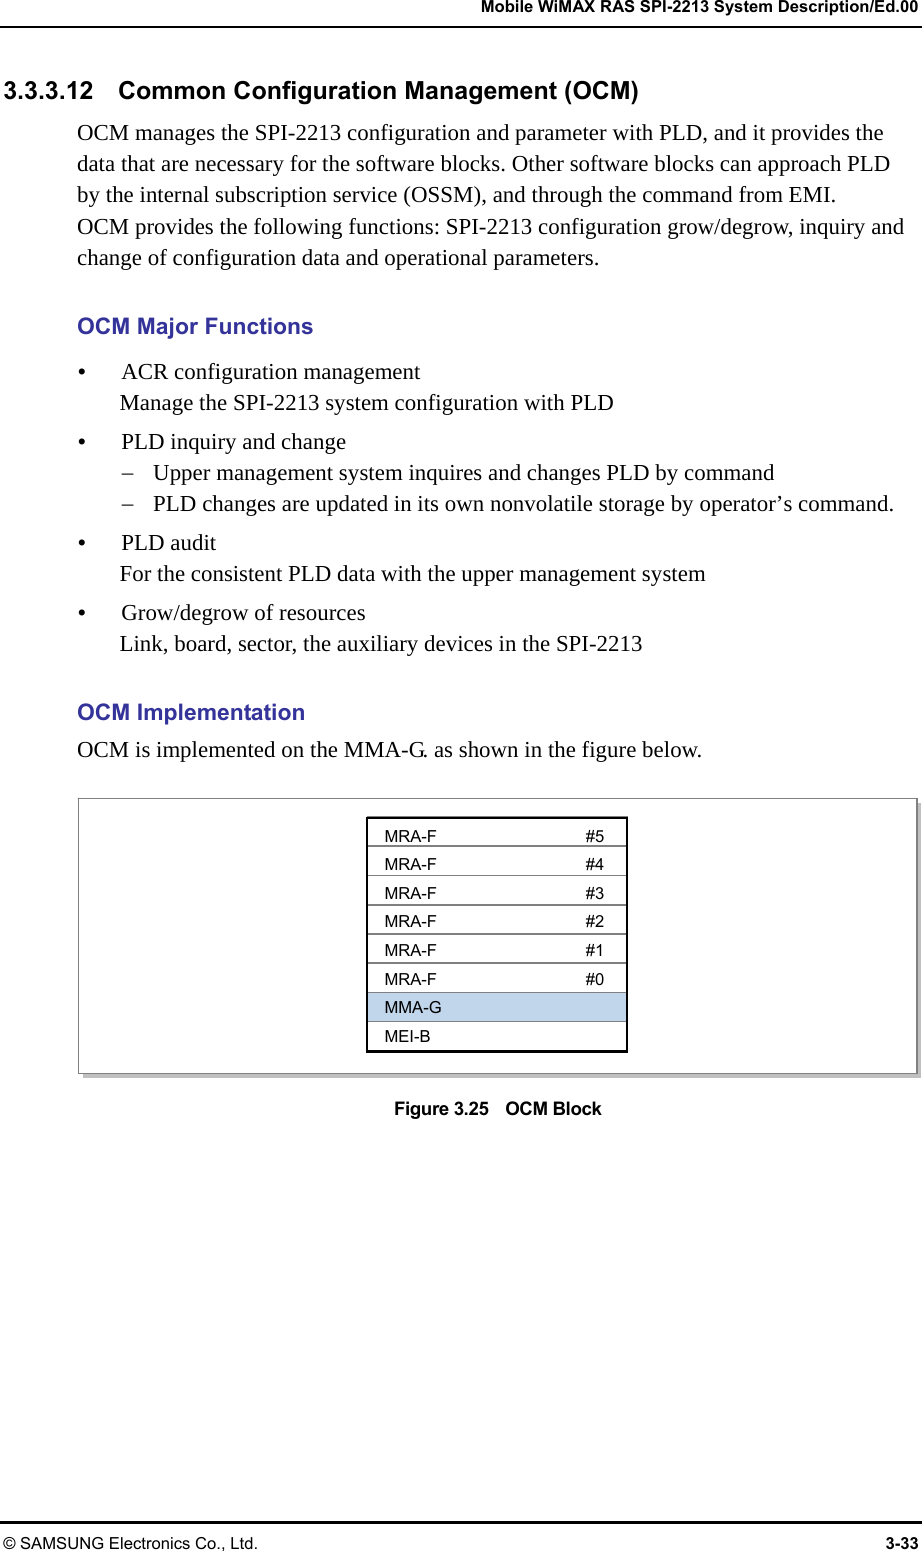   Mobile WiMAX RAS SPI-2213 System Description/Ed.00 © SAMSUNG Electronics Co., Ltd.  3-33 3.3.3.12    Common Configuration Management (OCM) OCM manages the SPI-2213 configuration and parameter with PLD, and it provides the data that are necessary for the software blocks. Other software blocks can approach PLD by the internal subscription service (OSSM), and through the command from EMI.   OCM provides the following functions: SPI-2213 configuration grow/degrow, inquiry and change of configuration data and operational parameters.  OCM Major Functions y ACR configuration management Manage the SPI-2213 system configuration with PLD y PLD inquiry and change − Upper management system inquires and changes PLD by command − PLD changes are updated in its own nonvolatile storage by operator’s command. y PLD audit For the consistent PLD data with the upper management system y Grow/degrow of resources Link, board, sector, the auxiliary devices in the SPI-2213  OCM Implementation OCM is implemented on the MMA-G. as shown in the figure below.  Figure 3.25    OCM Block  MRA-F #5 MRA-F #4 MRA-F #3 MRA-F #2 MRA-F #1 MRA-F #0 MMA-G MEI-B 